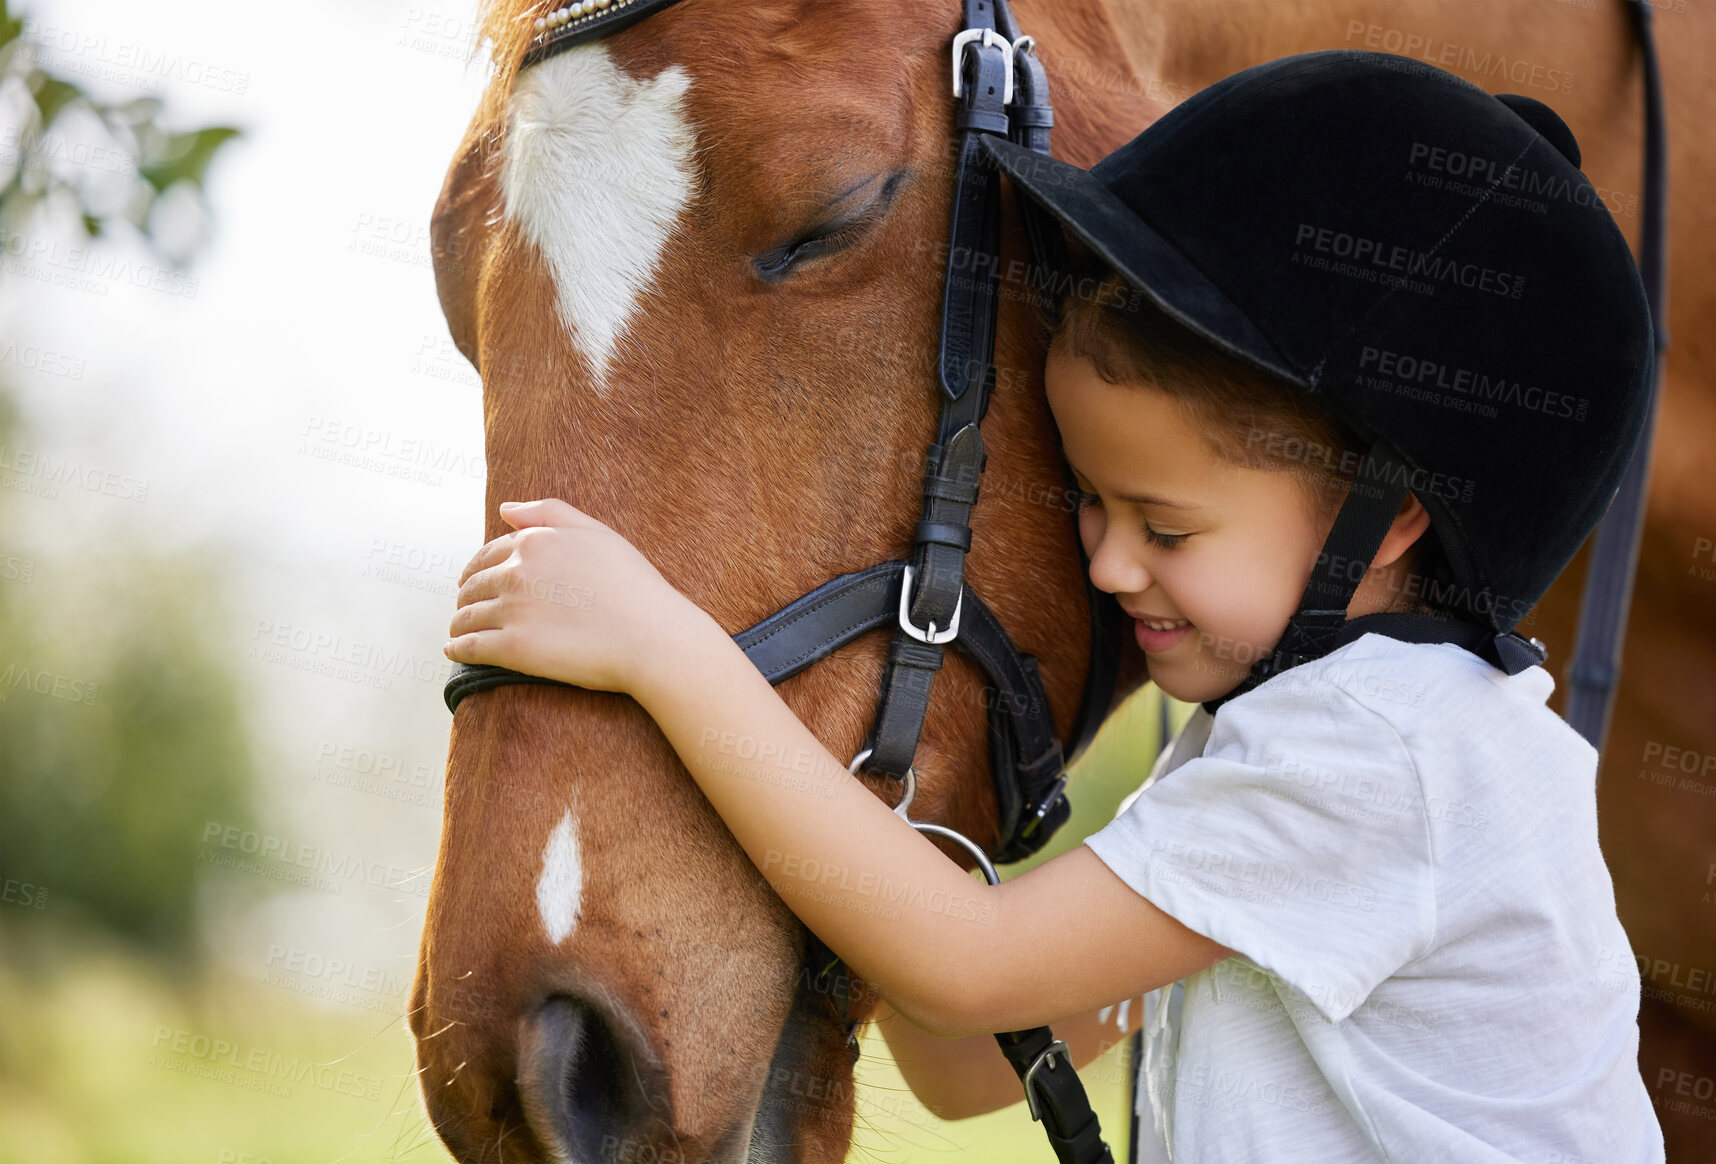 Buy stock photo Shot of a little girl hugging a horse outside